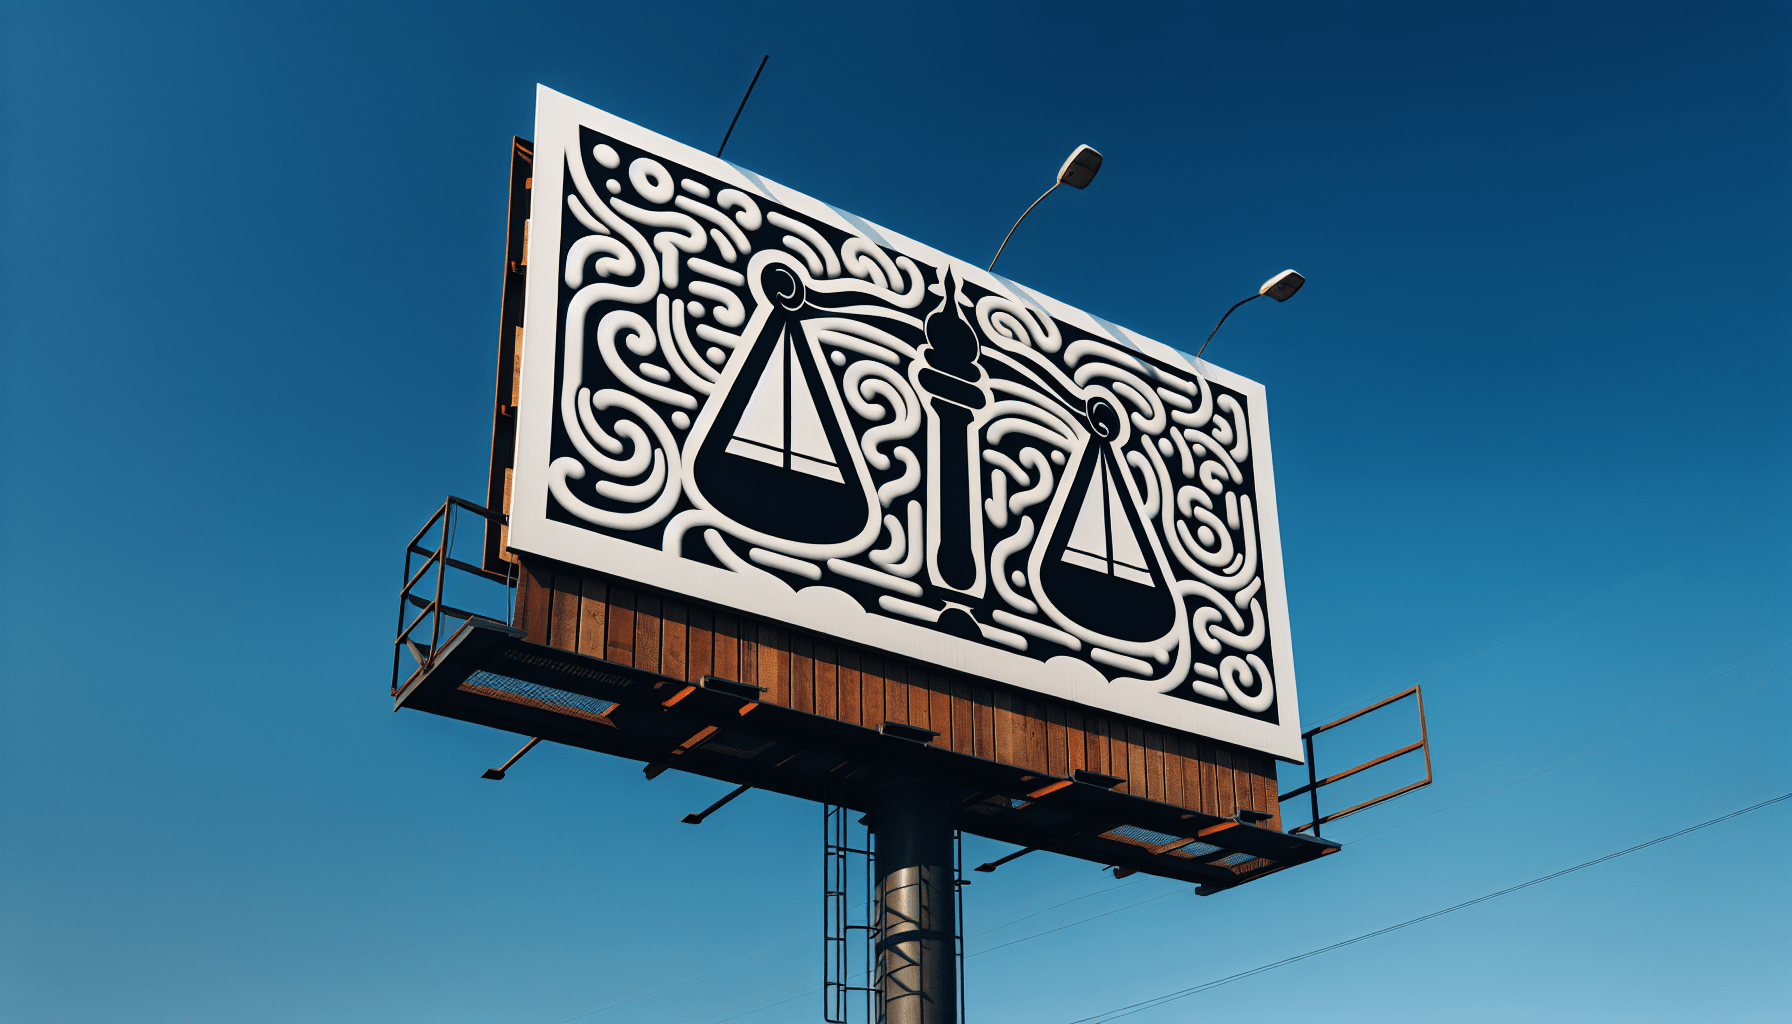 Crafting a memorable message for legal billboard advertising